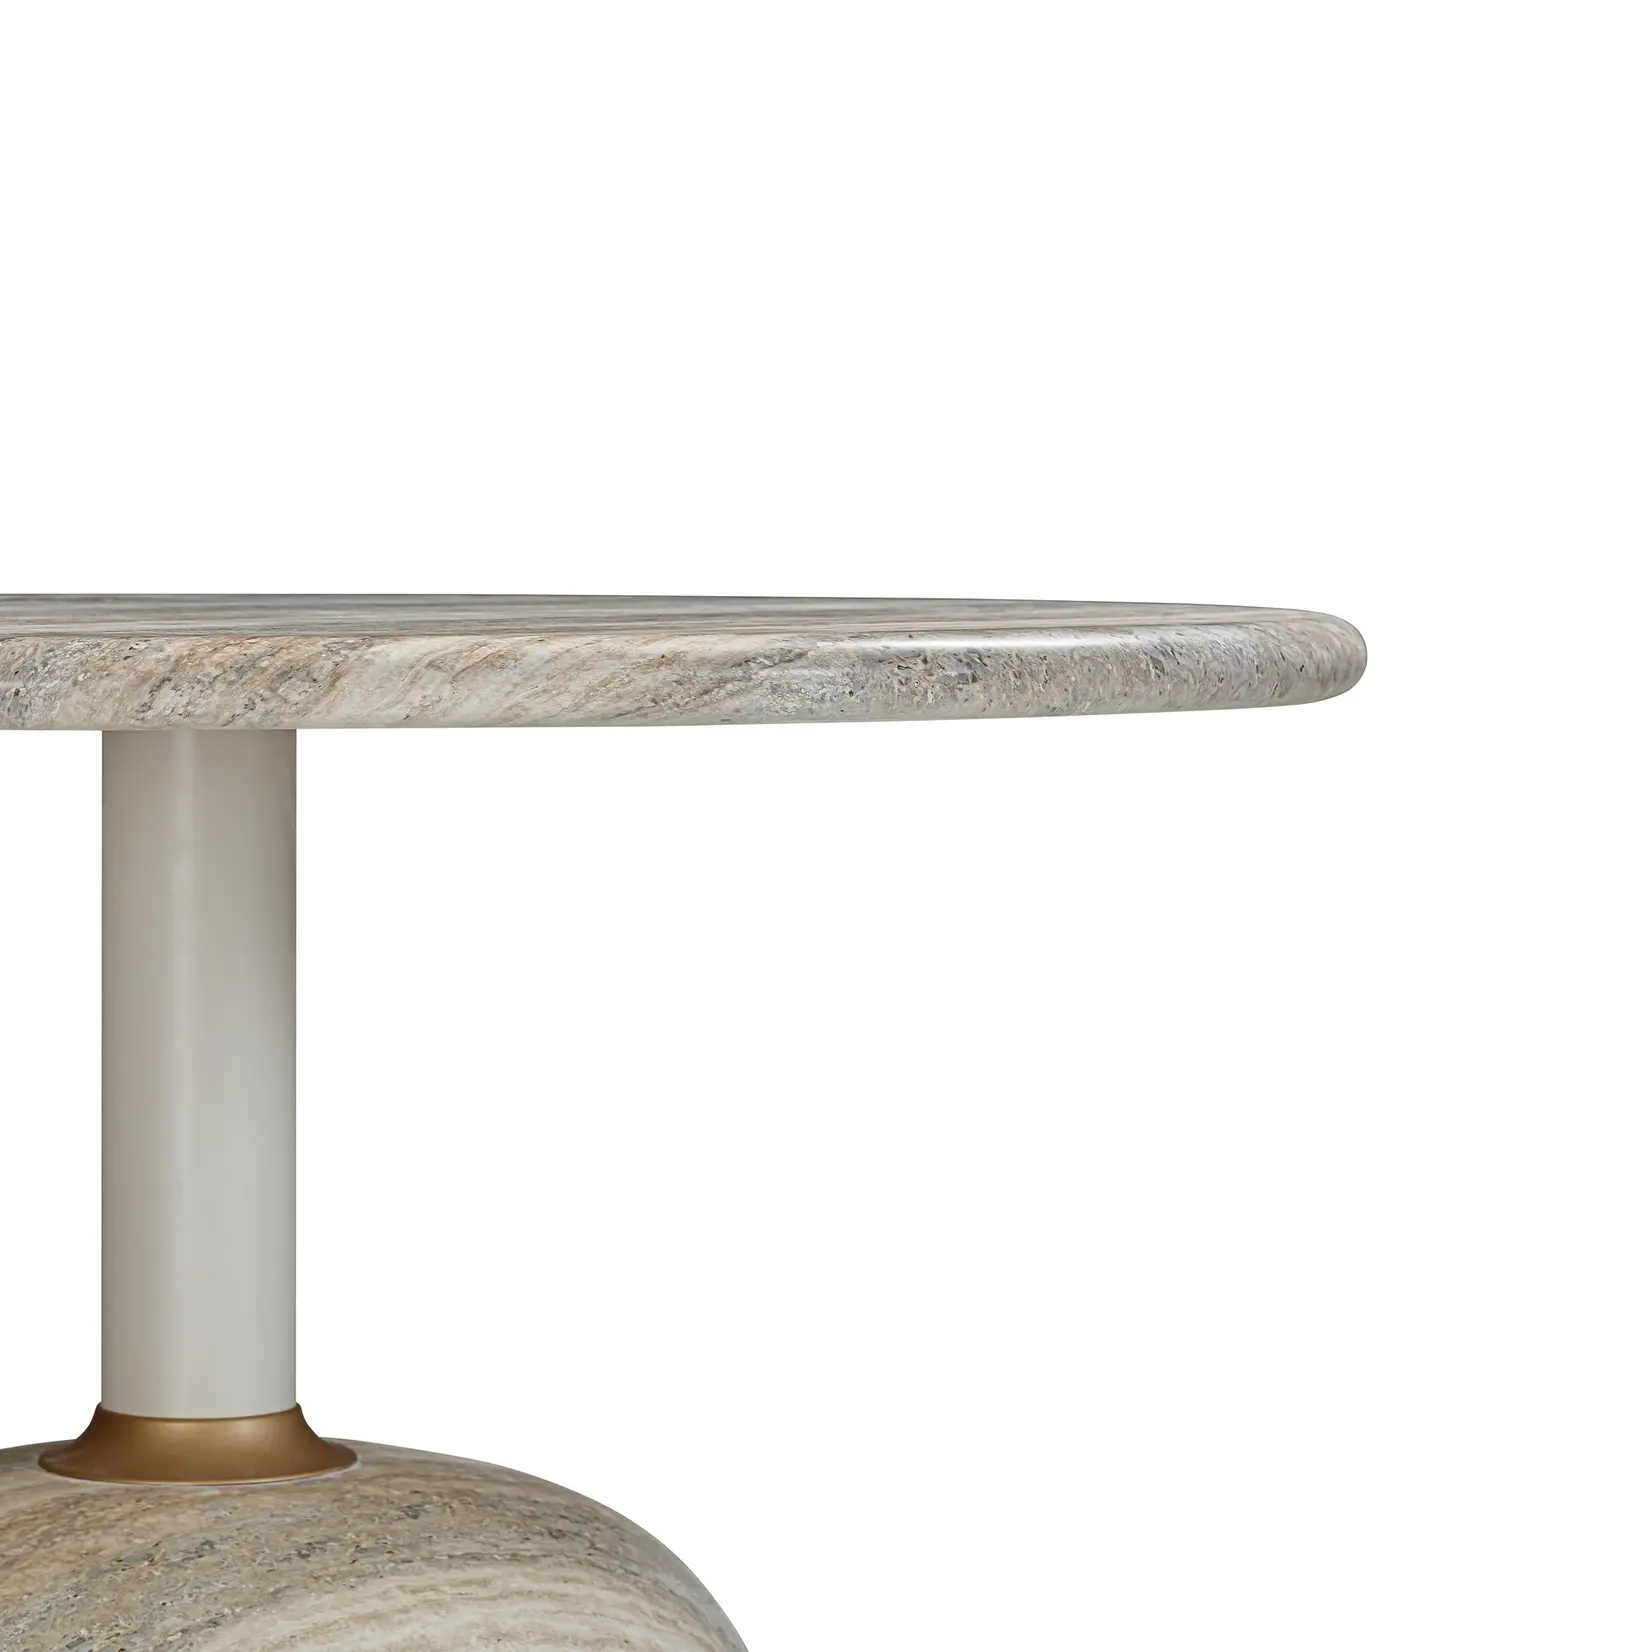 Tov Ana Concrete Faux Travertine Indoor / Outdoor 48" Round Dining Table